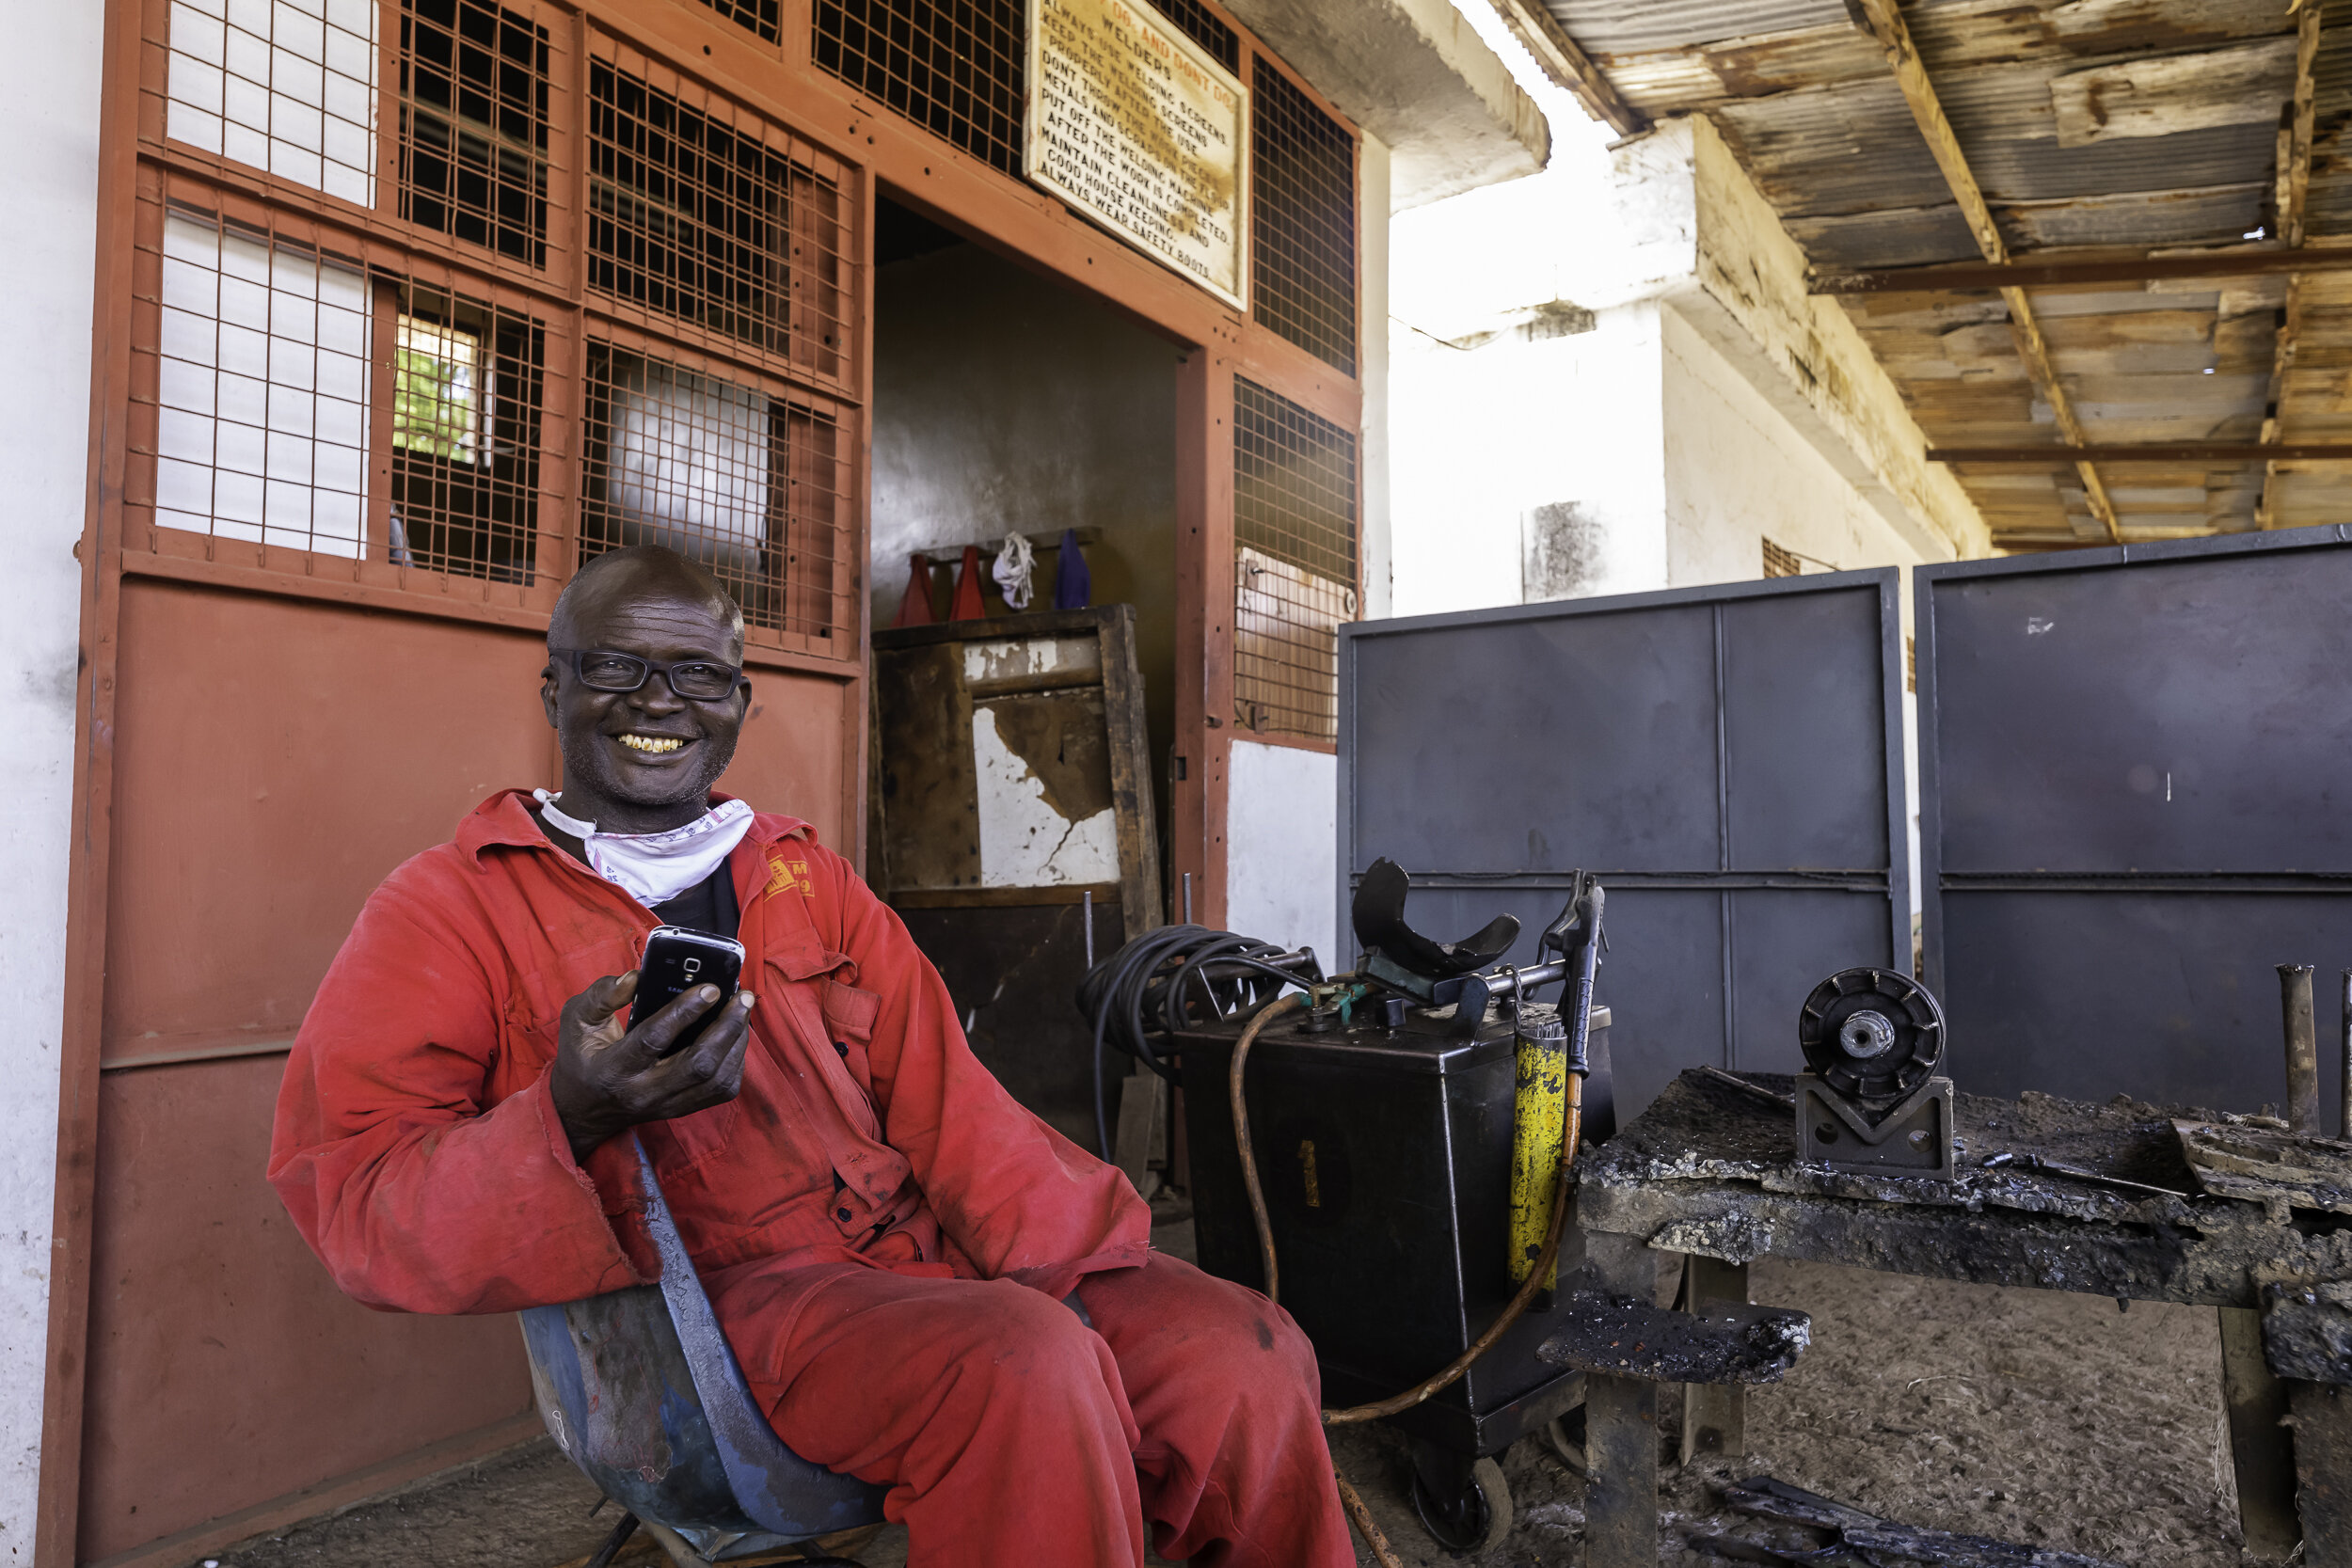  Maurice A, 63, works in the engineering department as a welder. He joined the factory in 1976, and has worked there for 45 years. He is a first-time wearer and was most excited aboout his ability to read text messages from his mobile phone.  